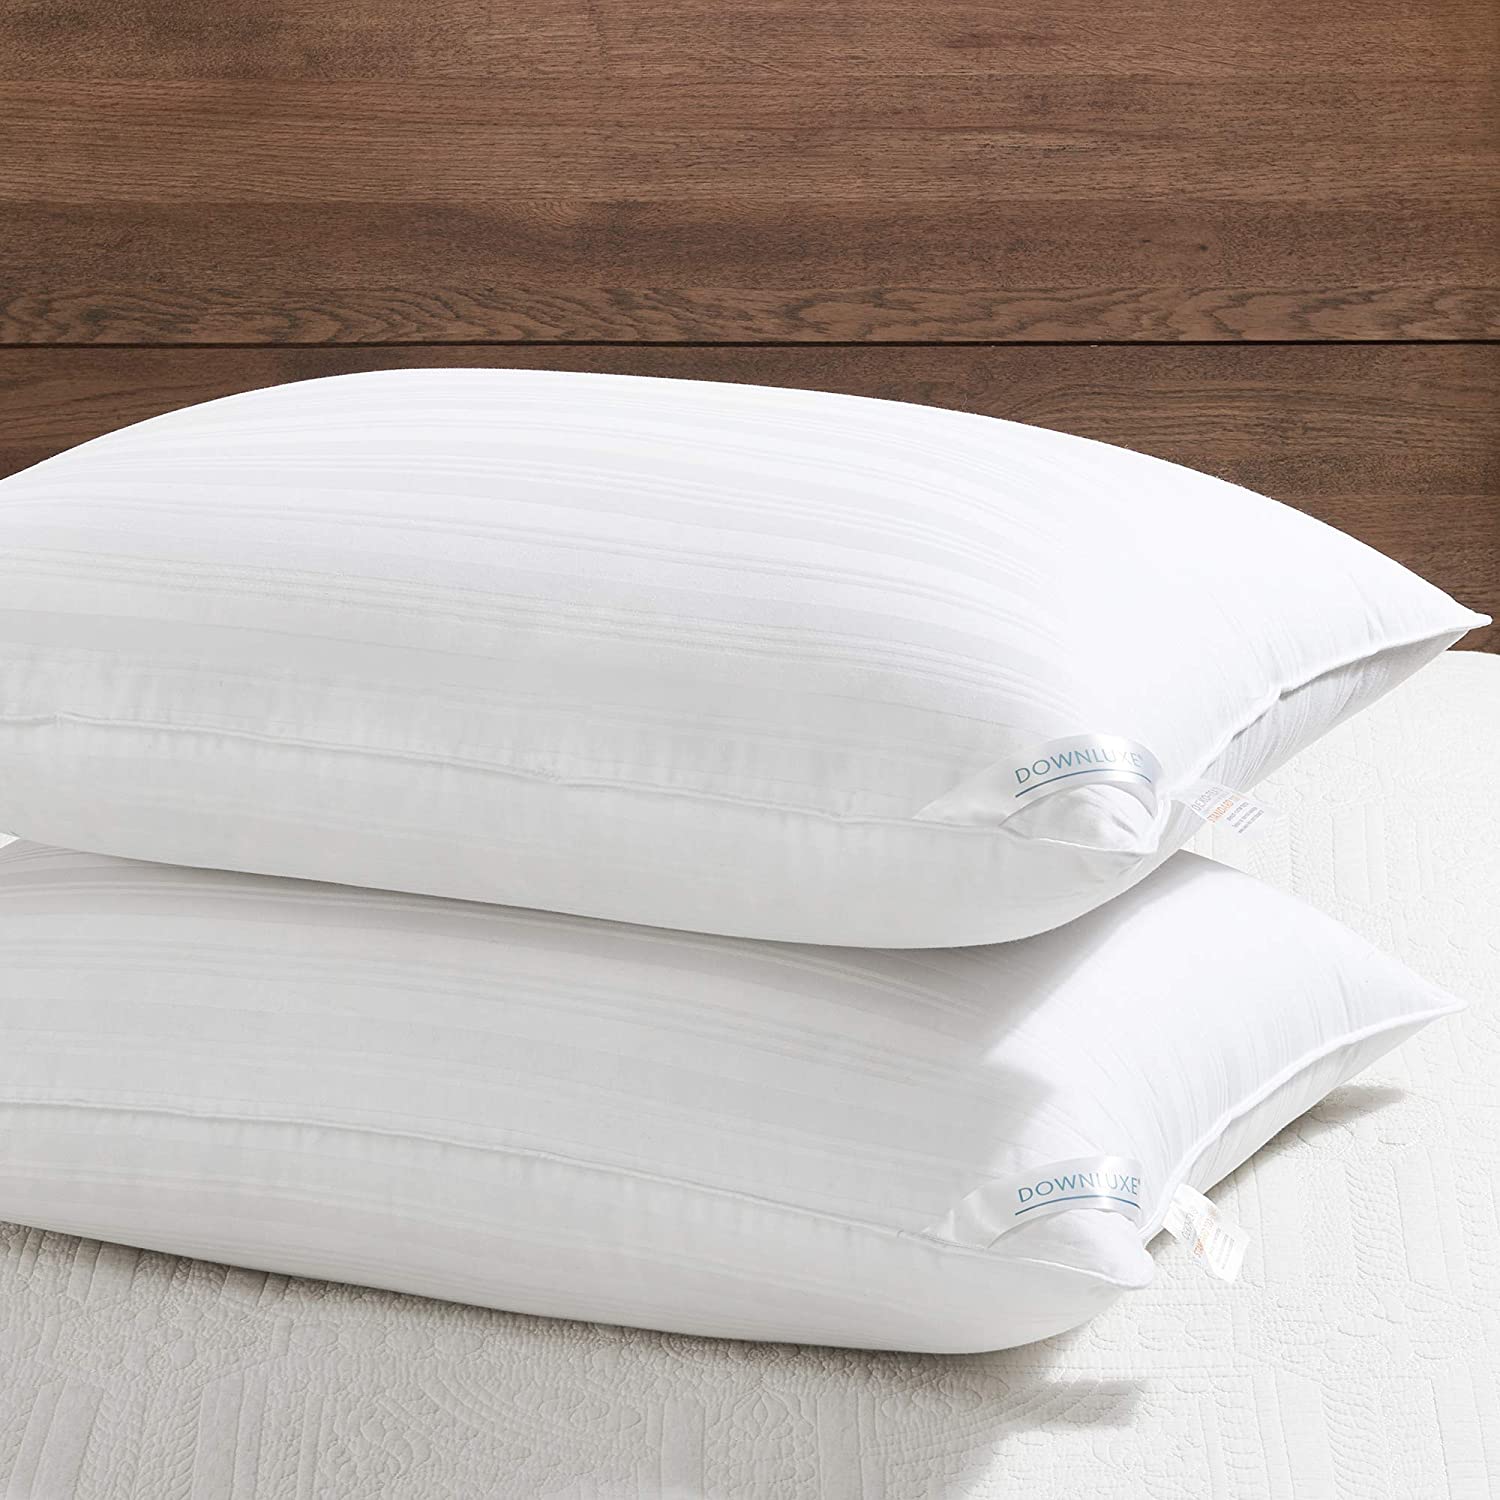 downluxe Queen Size Bed Pillows Set of 2